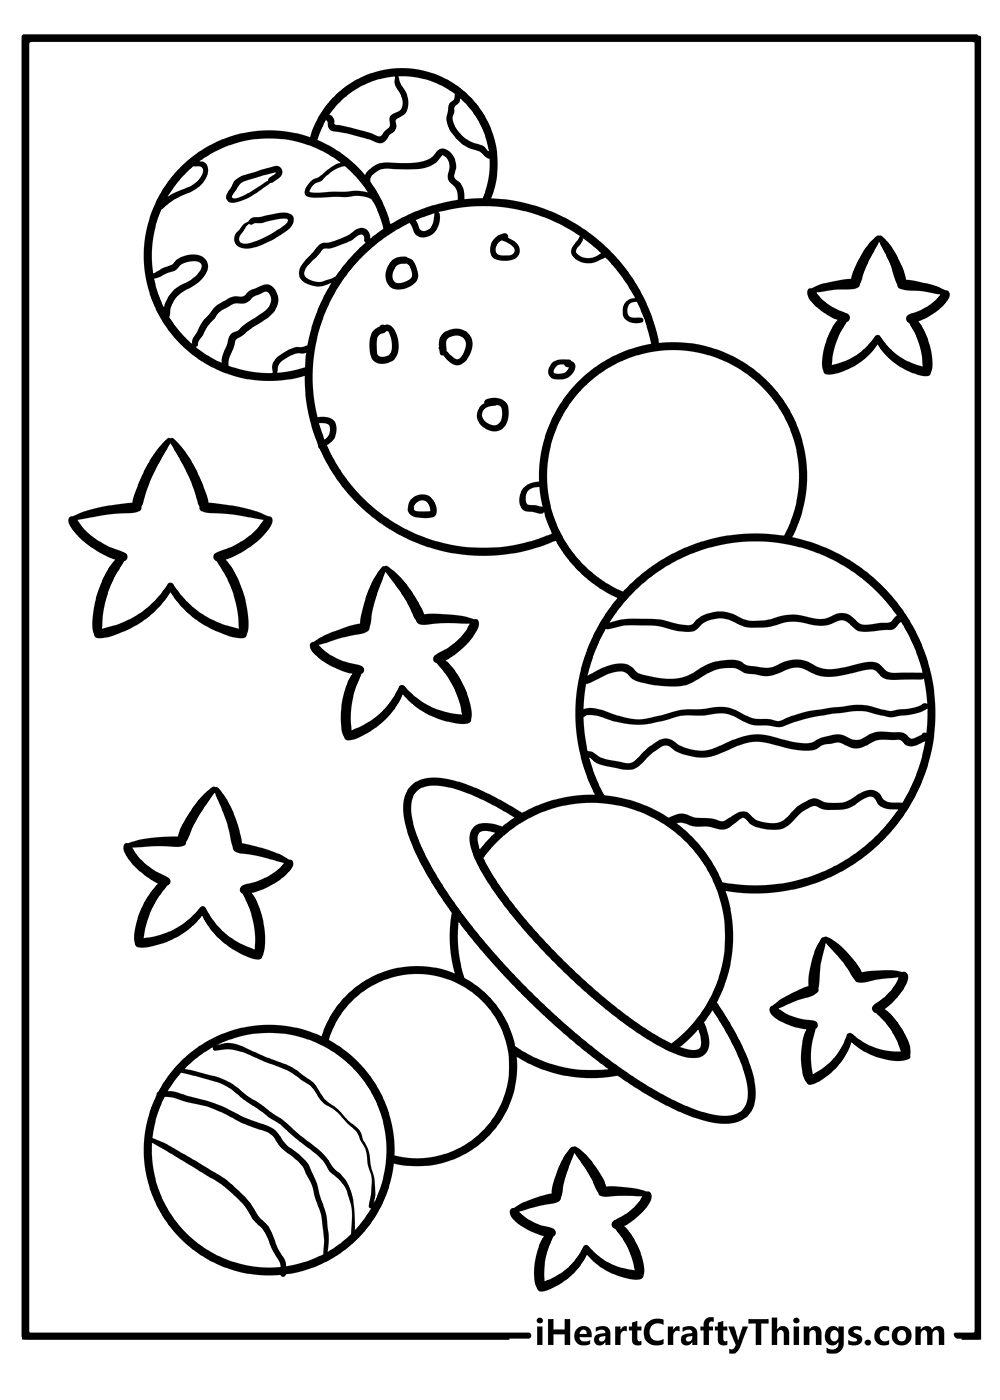 Printable Solar System Coloring Pages Updated 20